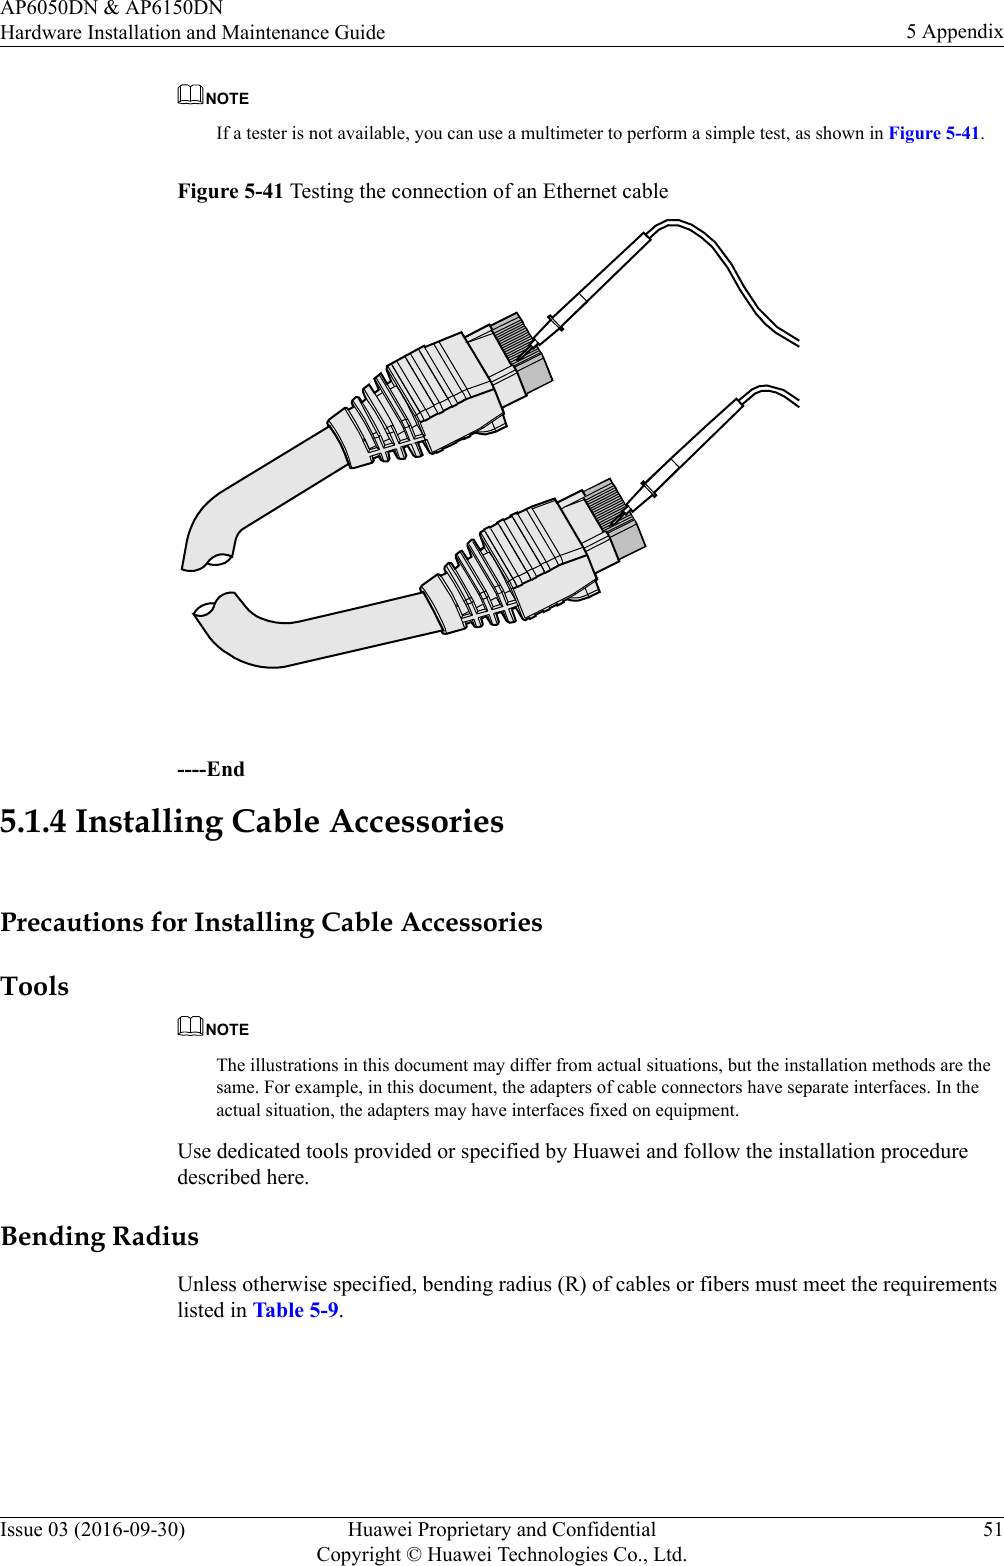 NOTEIf a tester is not available, you can use a multimeter to perform a simple test, as shown in Figure 5-41.Figure 5-41 Testing the connection of an Ethernet cable ----End5.1.4 Installing Cable AccessoriesPrecautions for Installing Cable AccessoriesToolsNOTEThe illustrations in this document may differ from actual situations, but the installation methods are thesame. For example, in this document, the adapters of cable connectors have separate interfaces. In theactual situation, the adapters may have interfaces fixed on equipment.Use dedicated tools provided or specified by Huawei and follow the installation proceduredescribed here.Bending RadiusUnless otherwise specified, bending radius (R) of cables or fibers must meet the requirementslisted in Table 5-9.AP6050DN &amp; AP6150DNHardware Installation and Maintenance Guide 5 AppendixIssue 03 (2016-09-30) Huawei Proprietary and ConfidentialCopyright © Huawei Technologies Co., Ltd.51